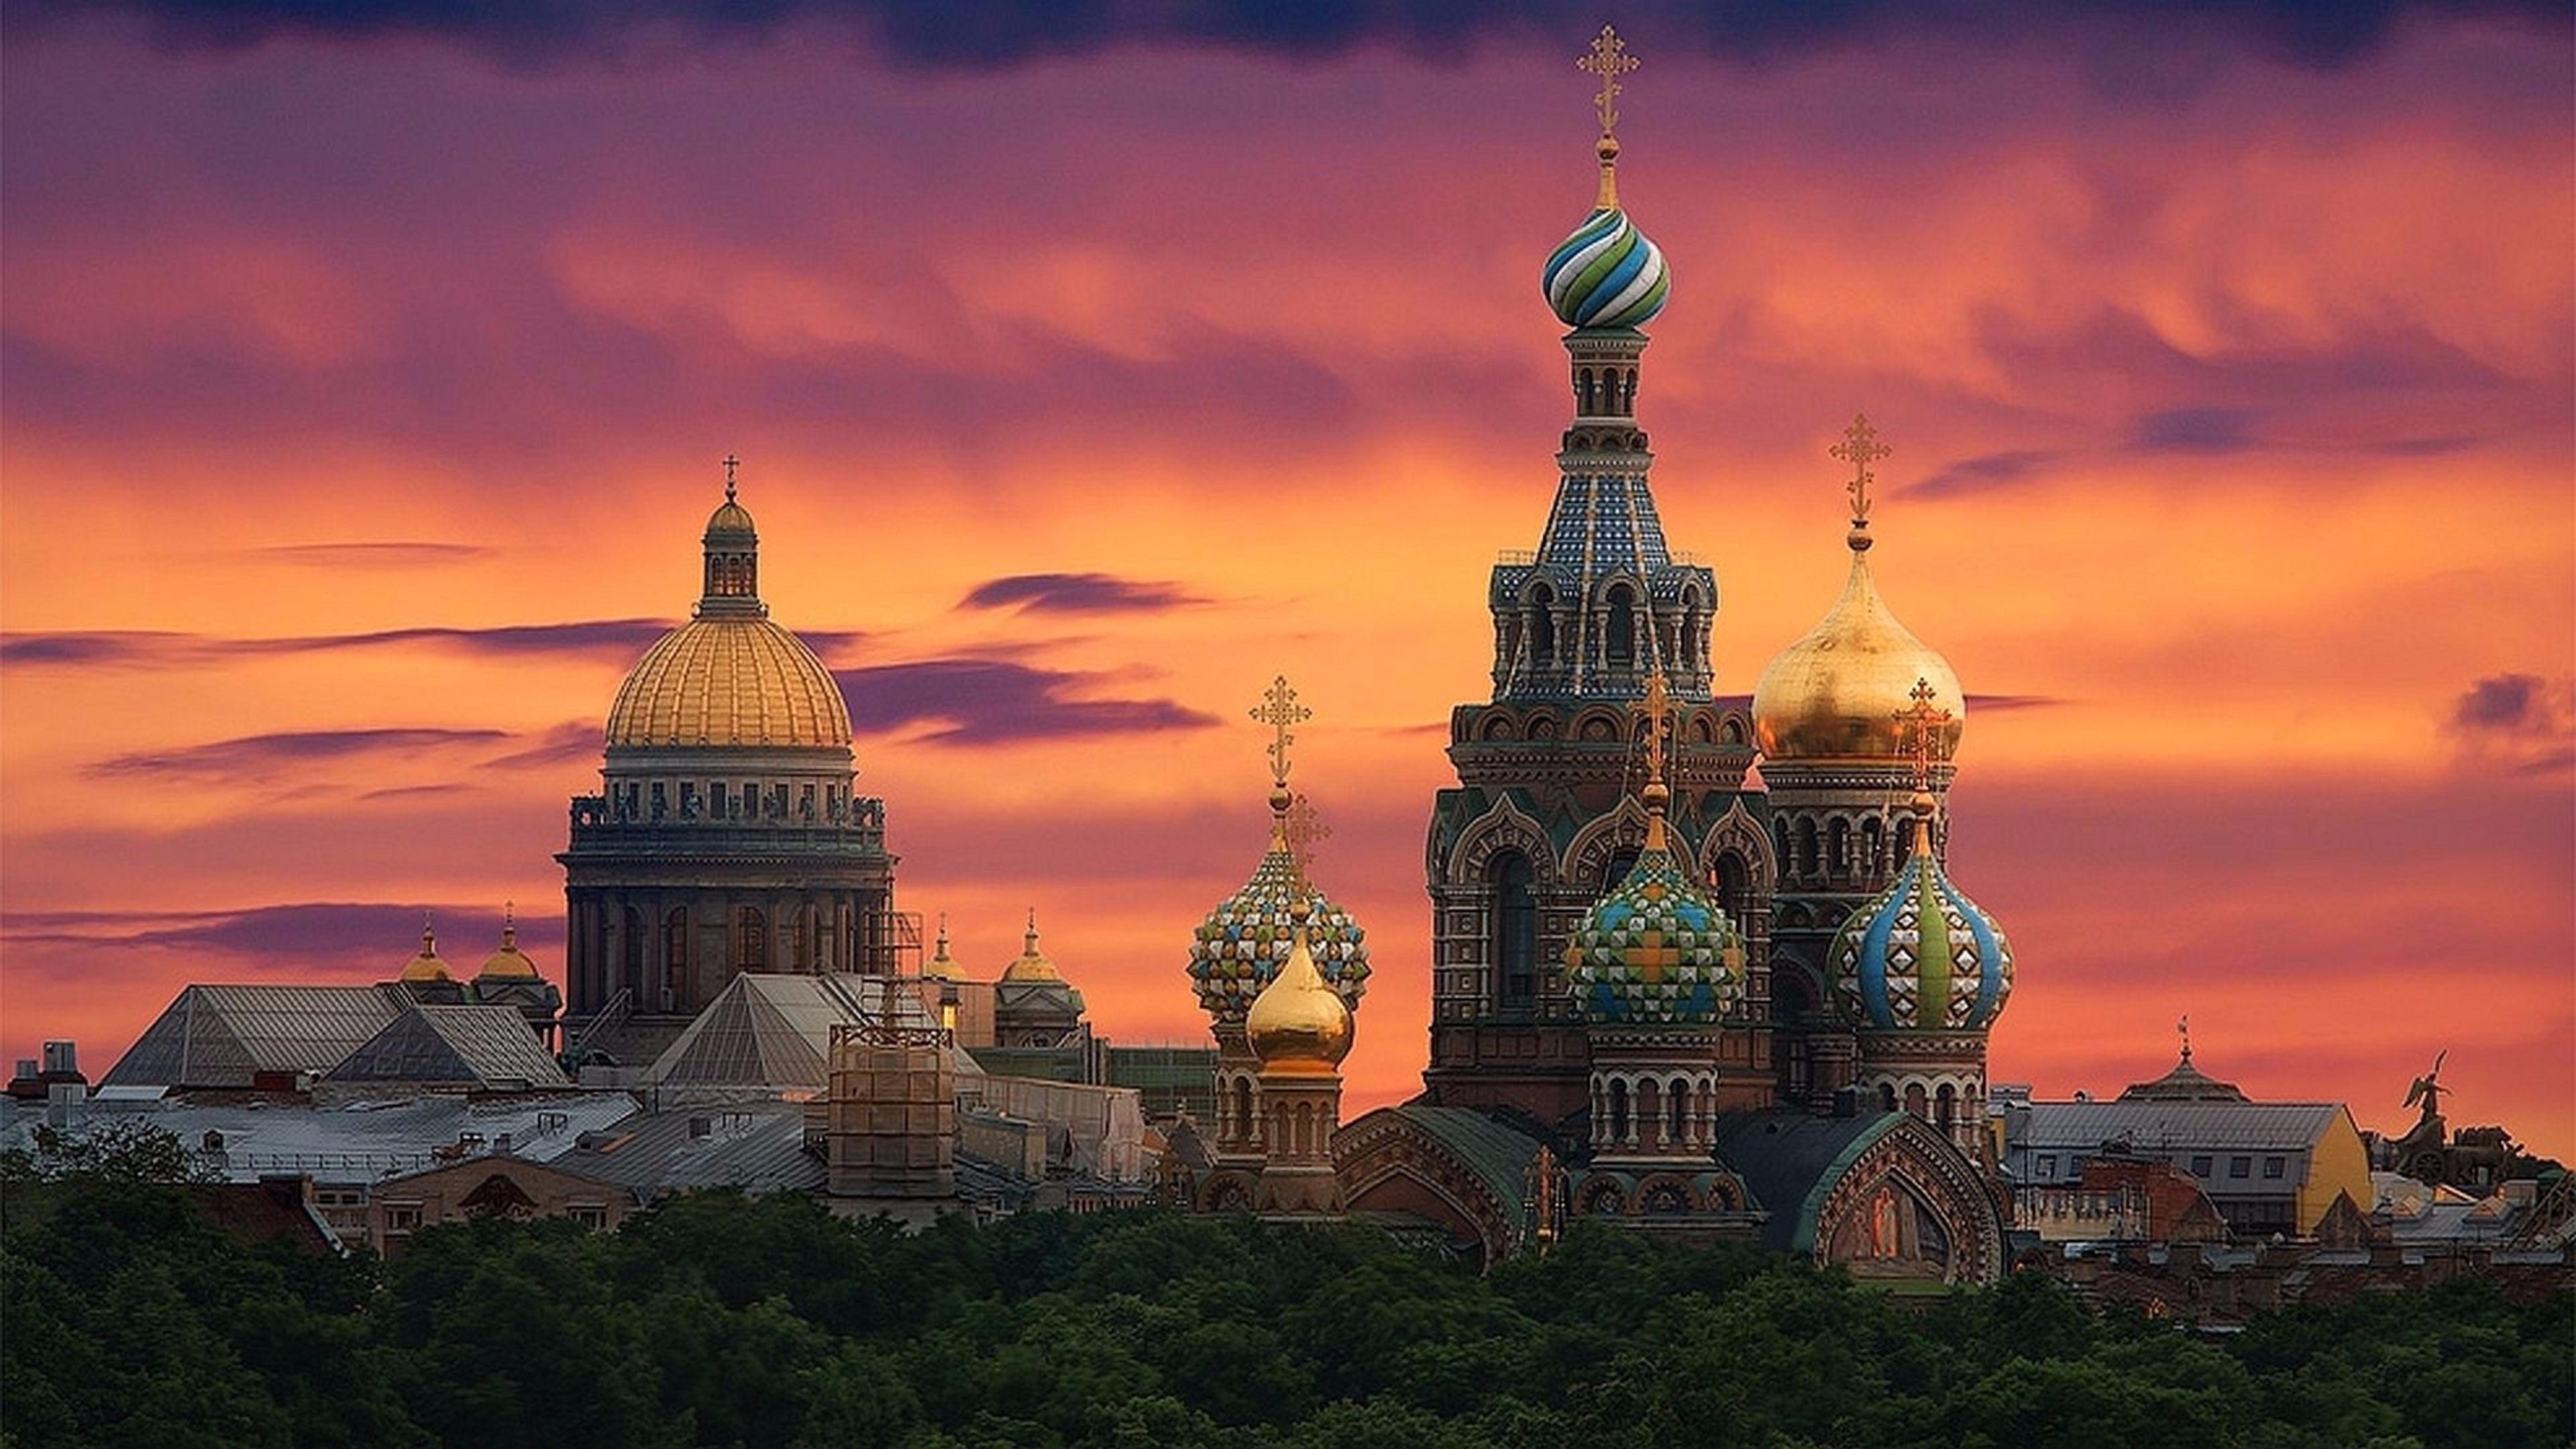 Church Of The Savior On Spilled Blood. Petersburg, Russia